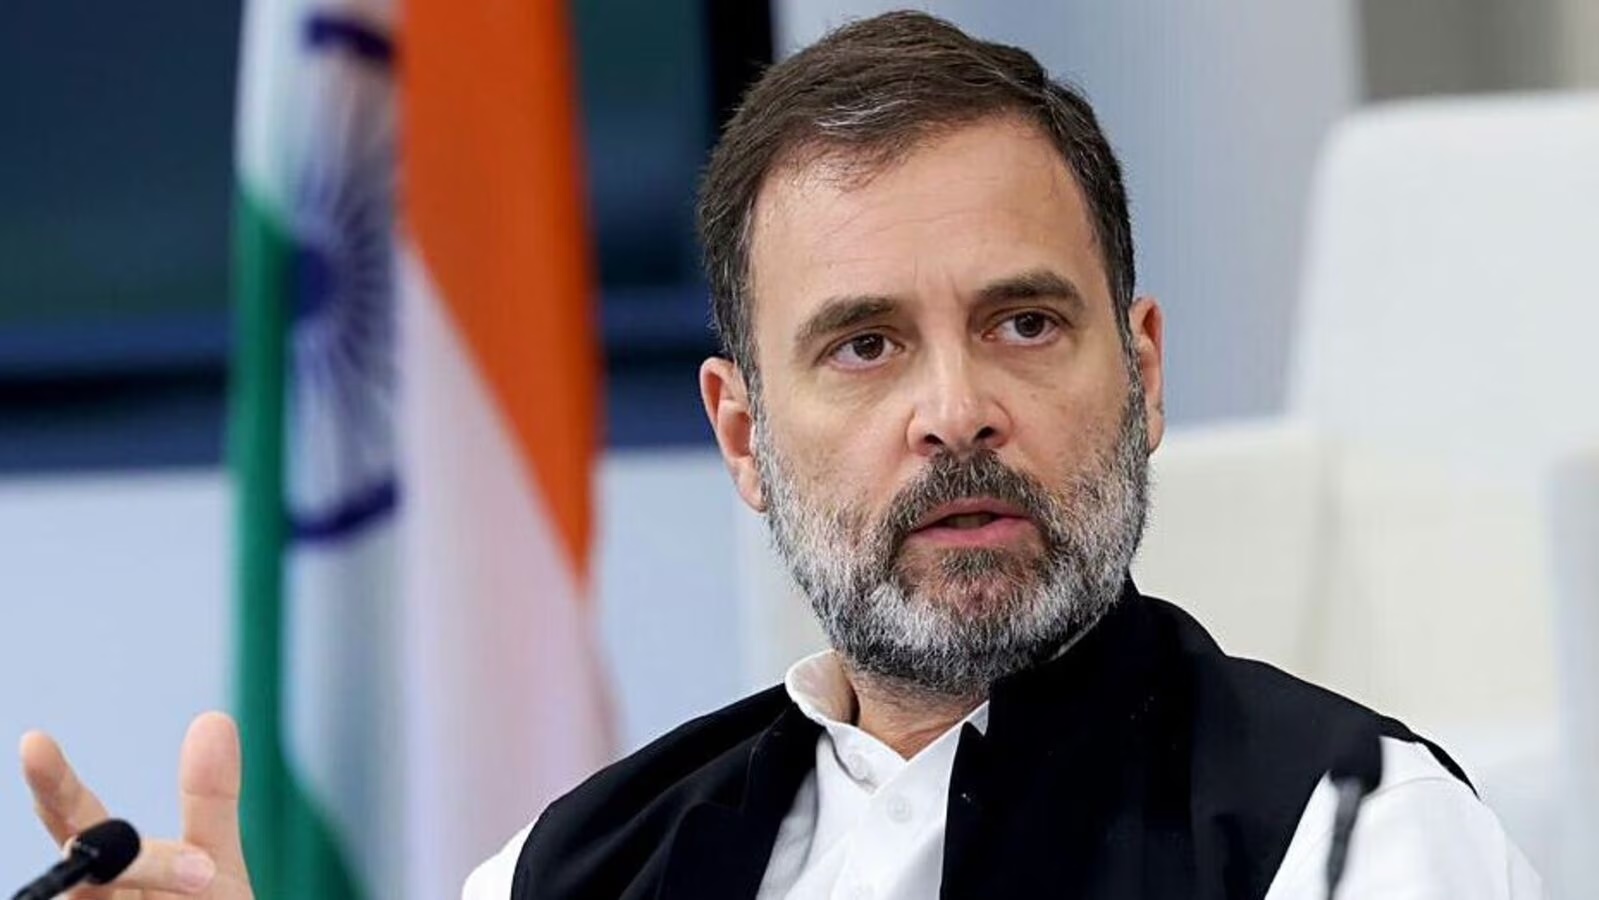 in open letter, 181 academics seek legal action against rahul gandhi for spreading falsehoods on vice chancellor appointments